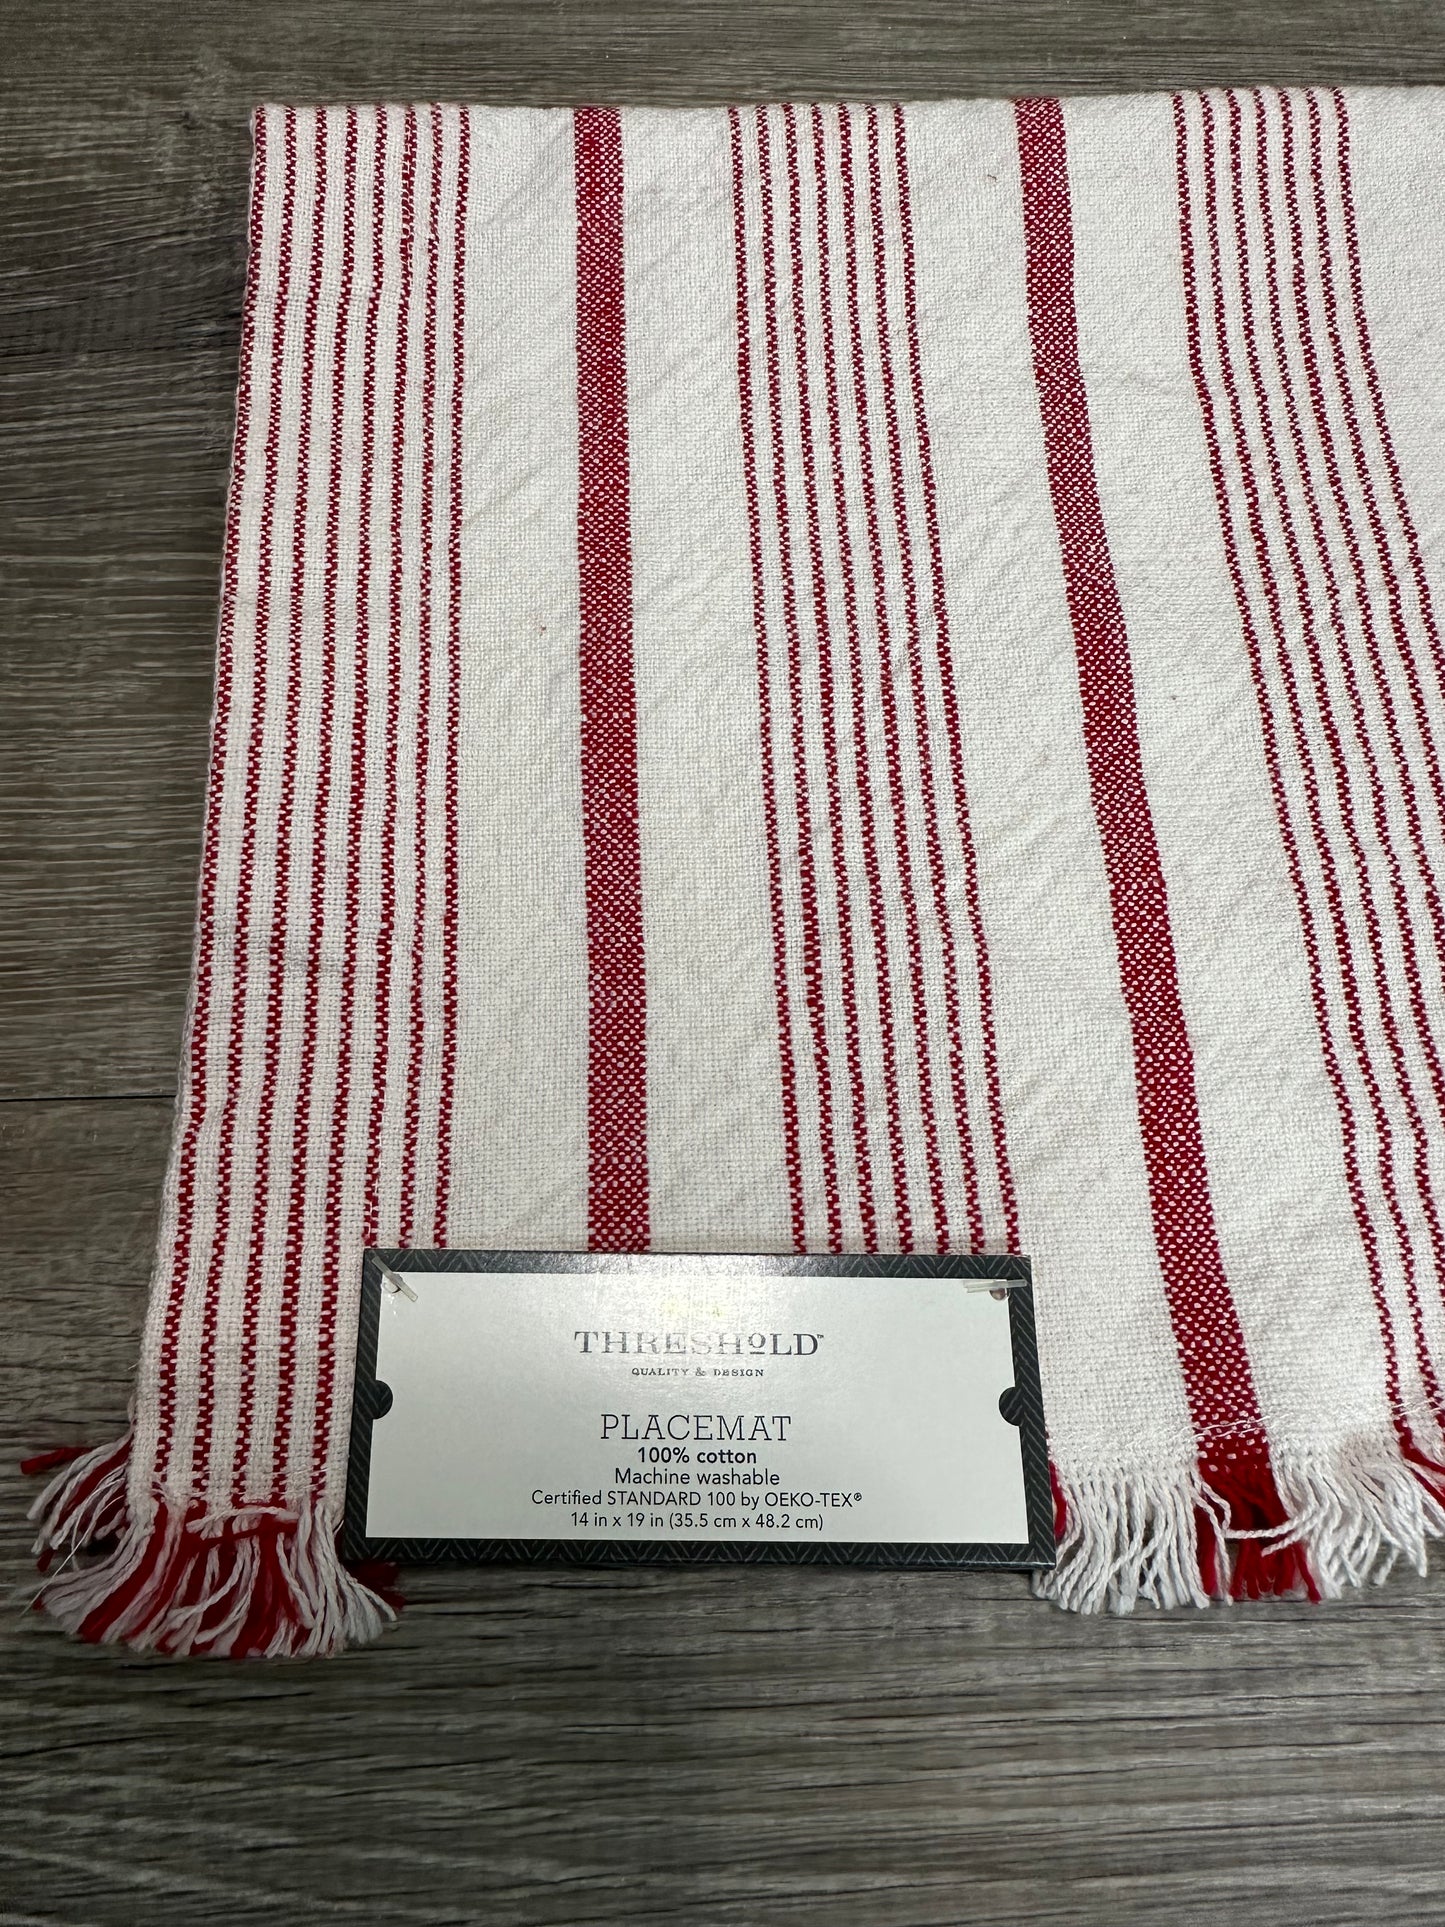 Threshold Cotton Placemat red and white stripes with fringe